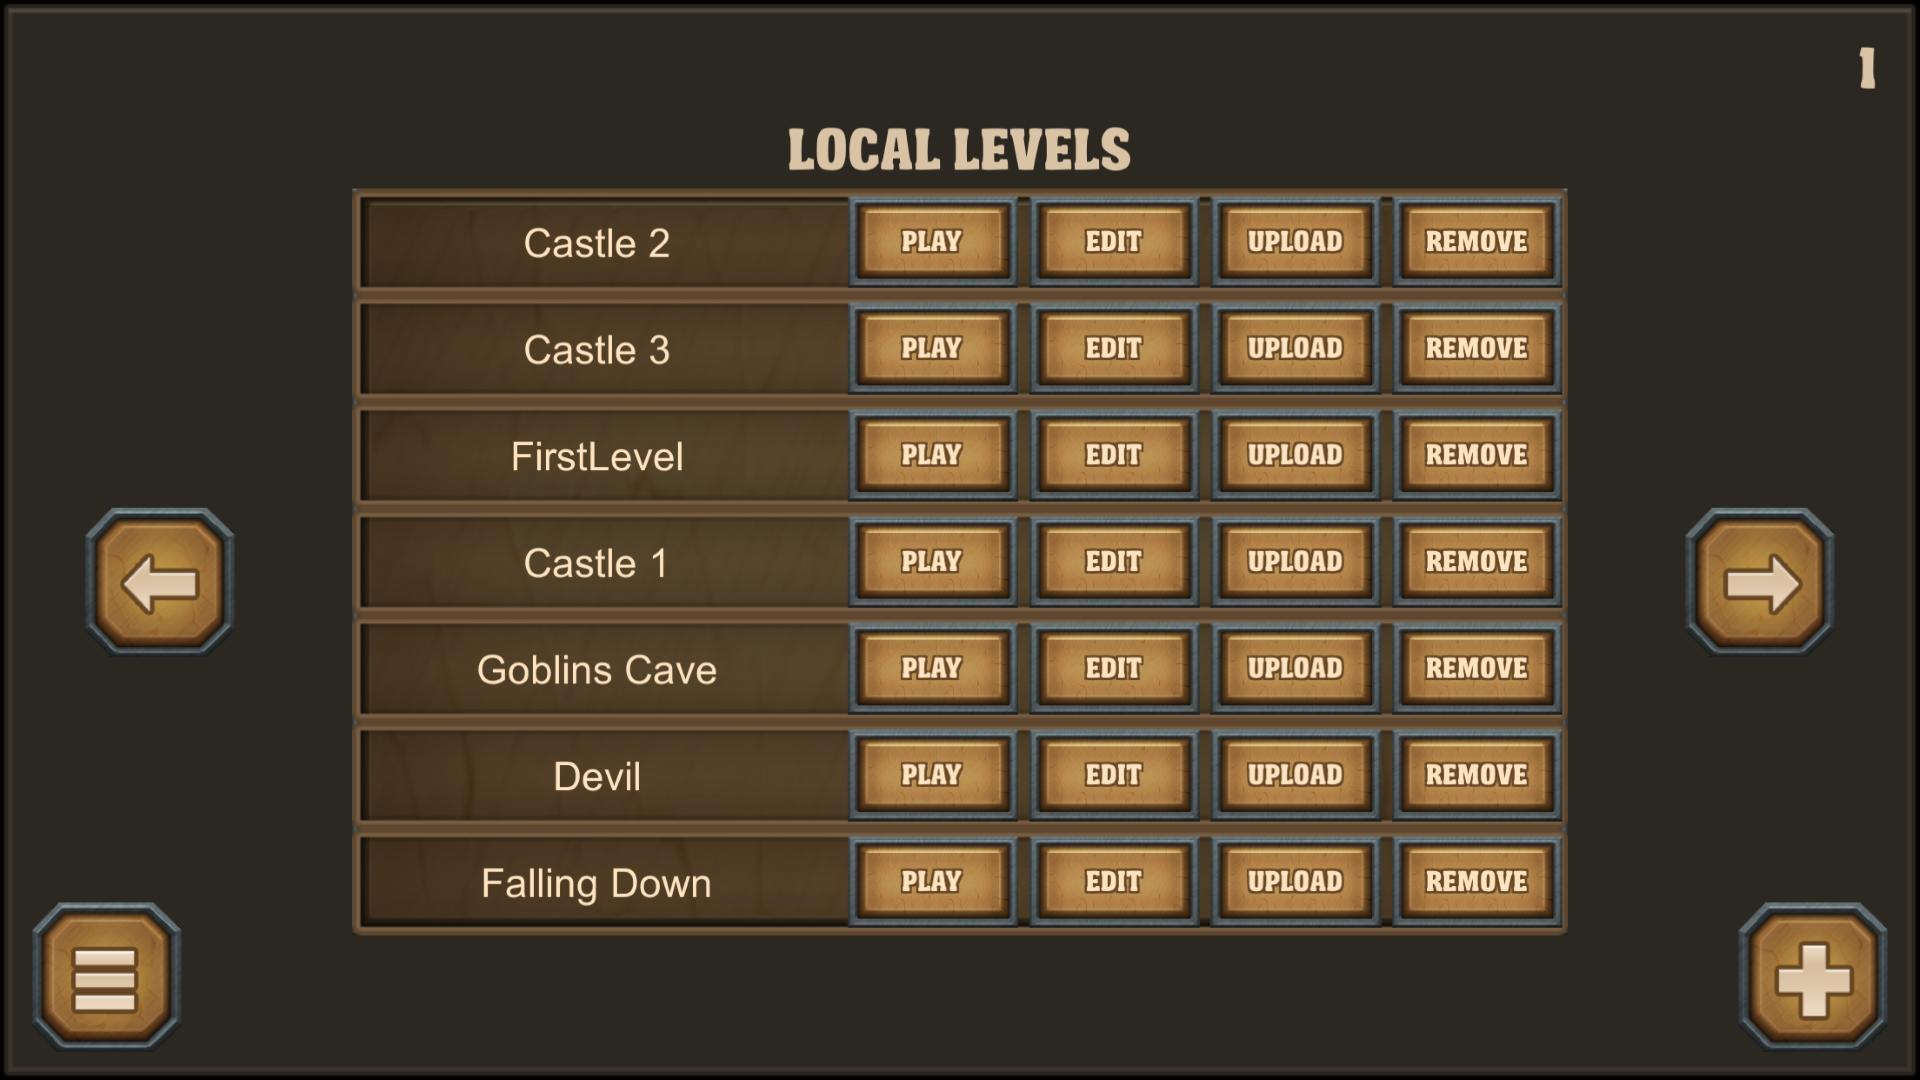 Epic Game Maker Create and Share Your Levels 1.9 Screenshot 7